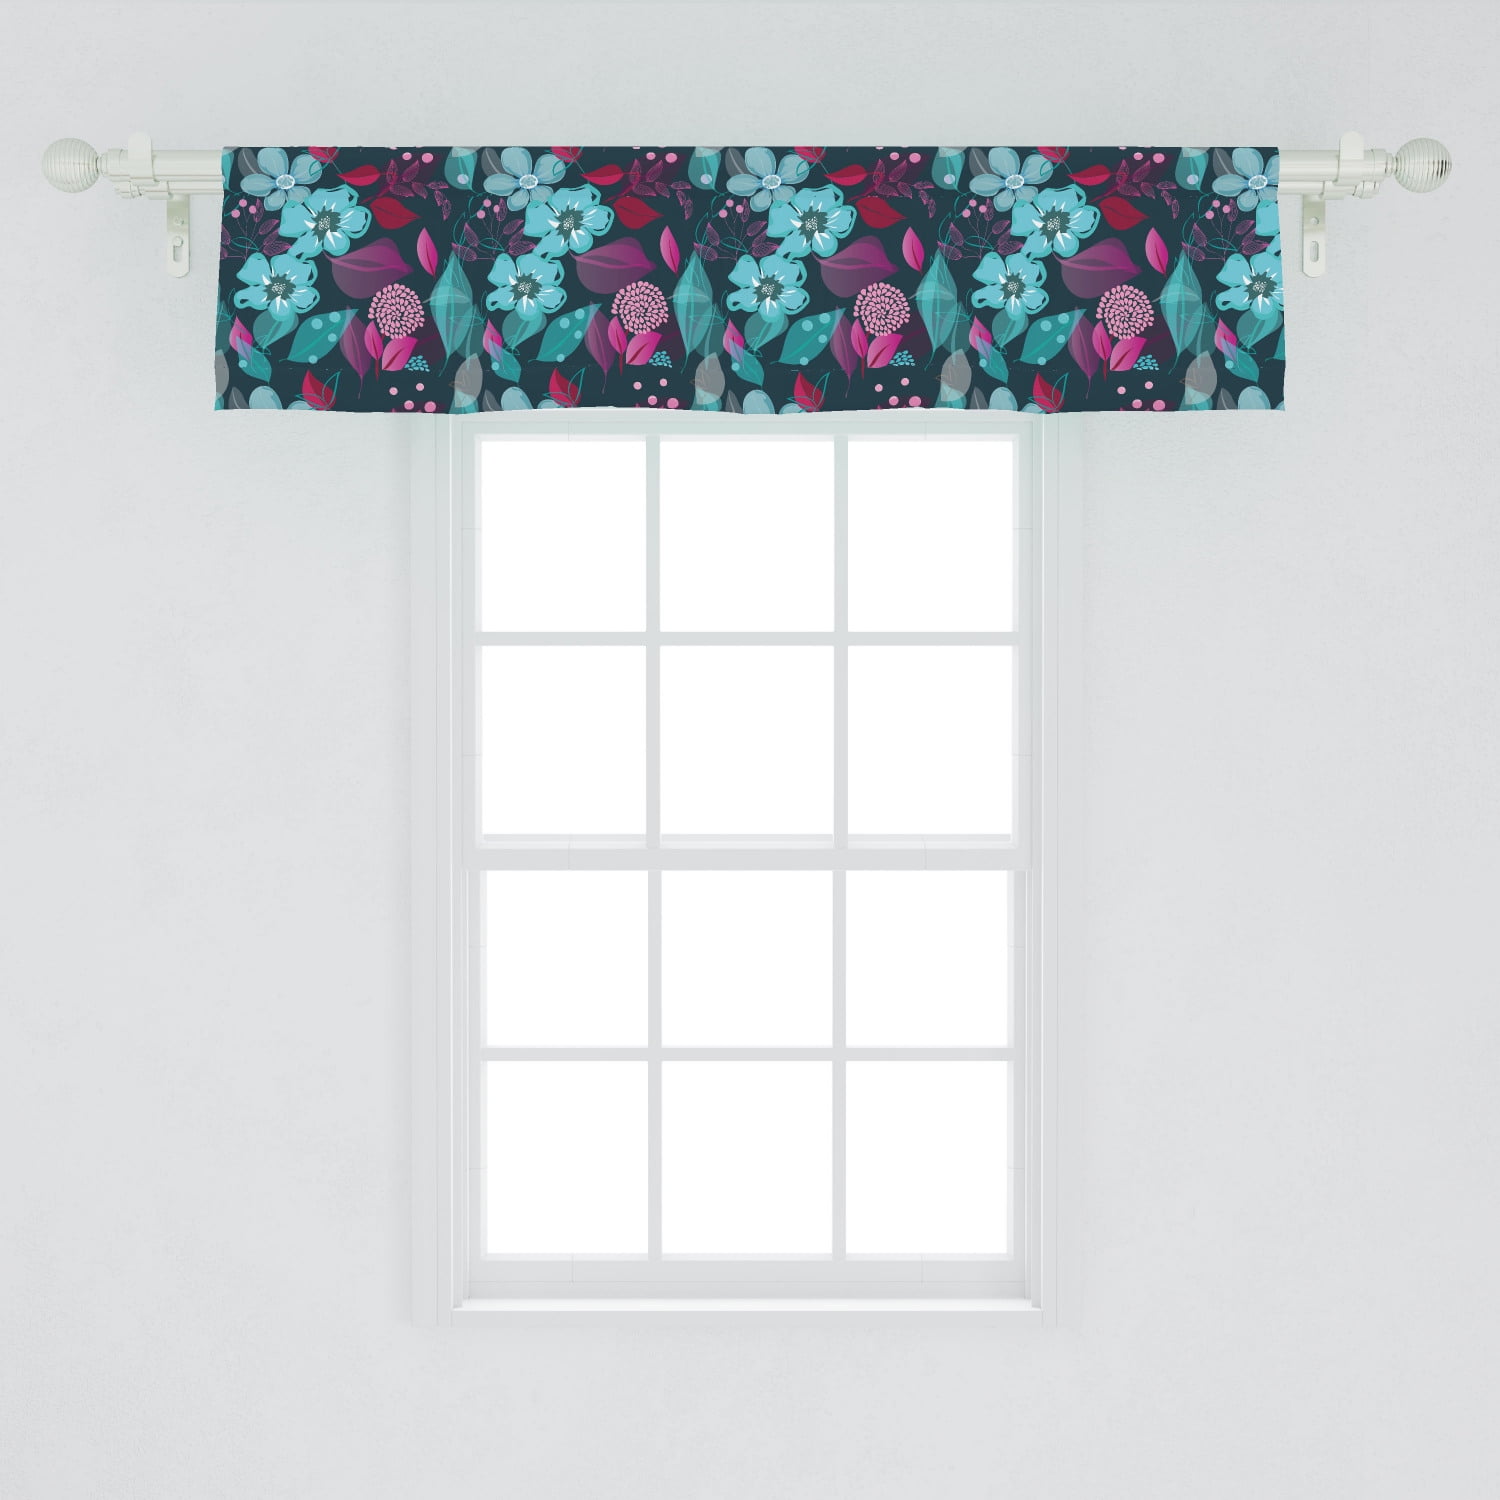 Flower Window Valance, Flow of Pale Blue Blossoms and Colorful Leaves ...